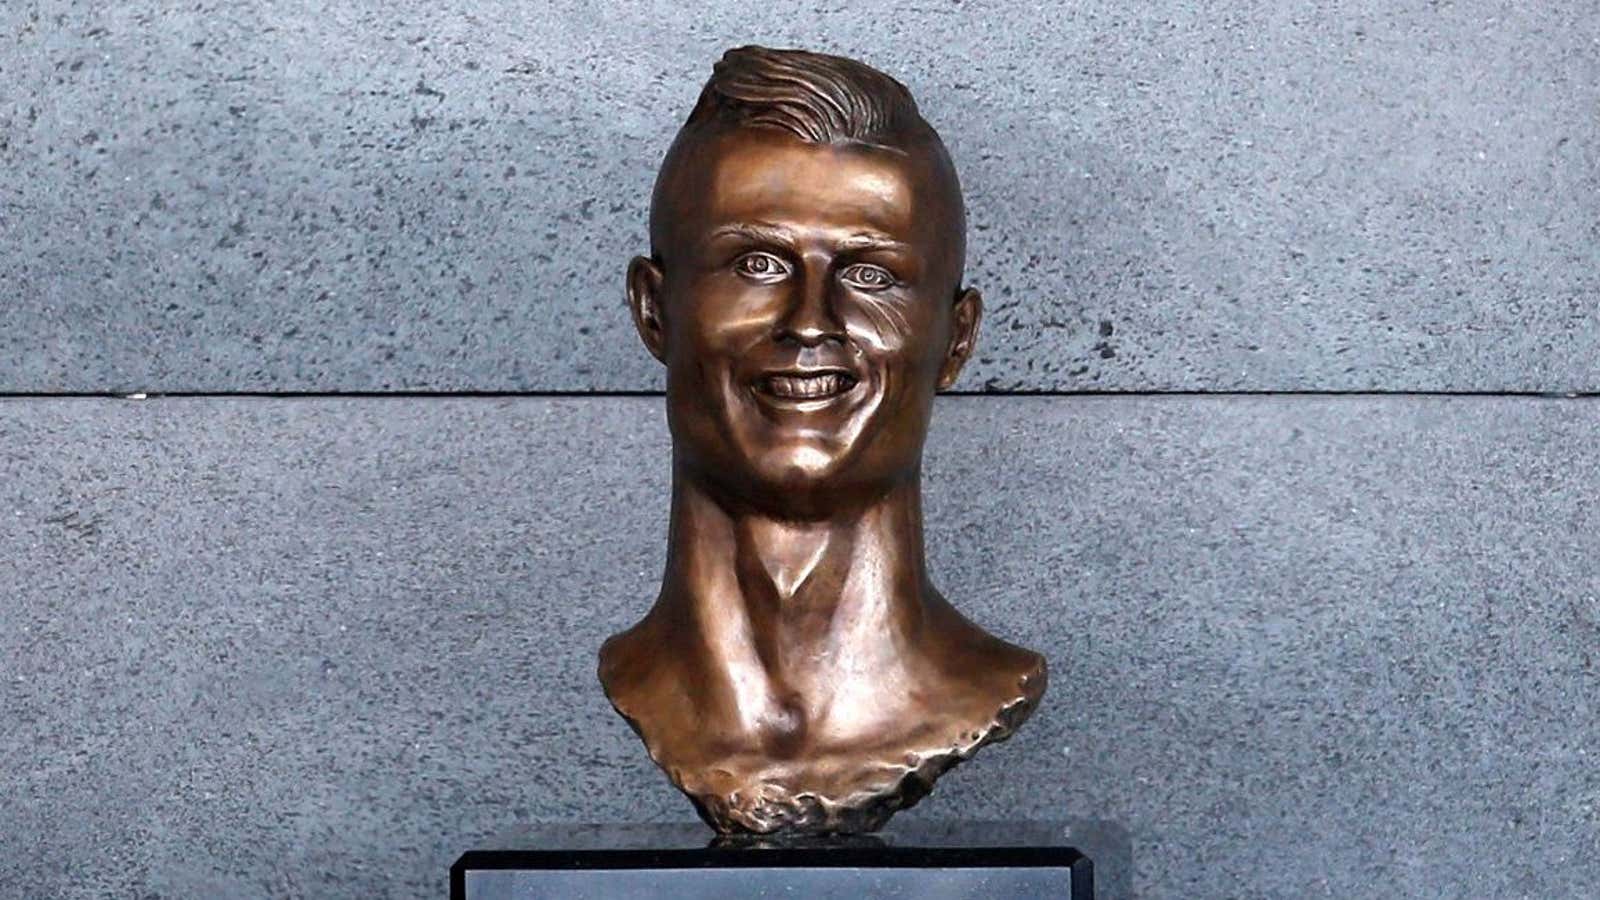 The Cristiano Ronaldo sculpture bust at the Madeira airport offers